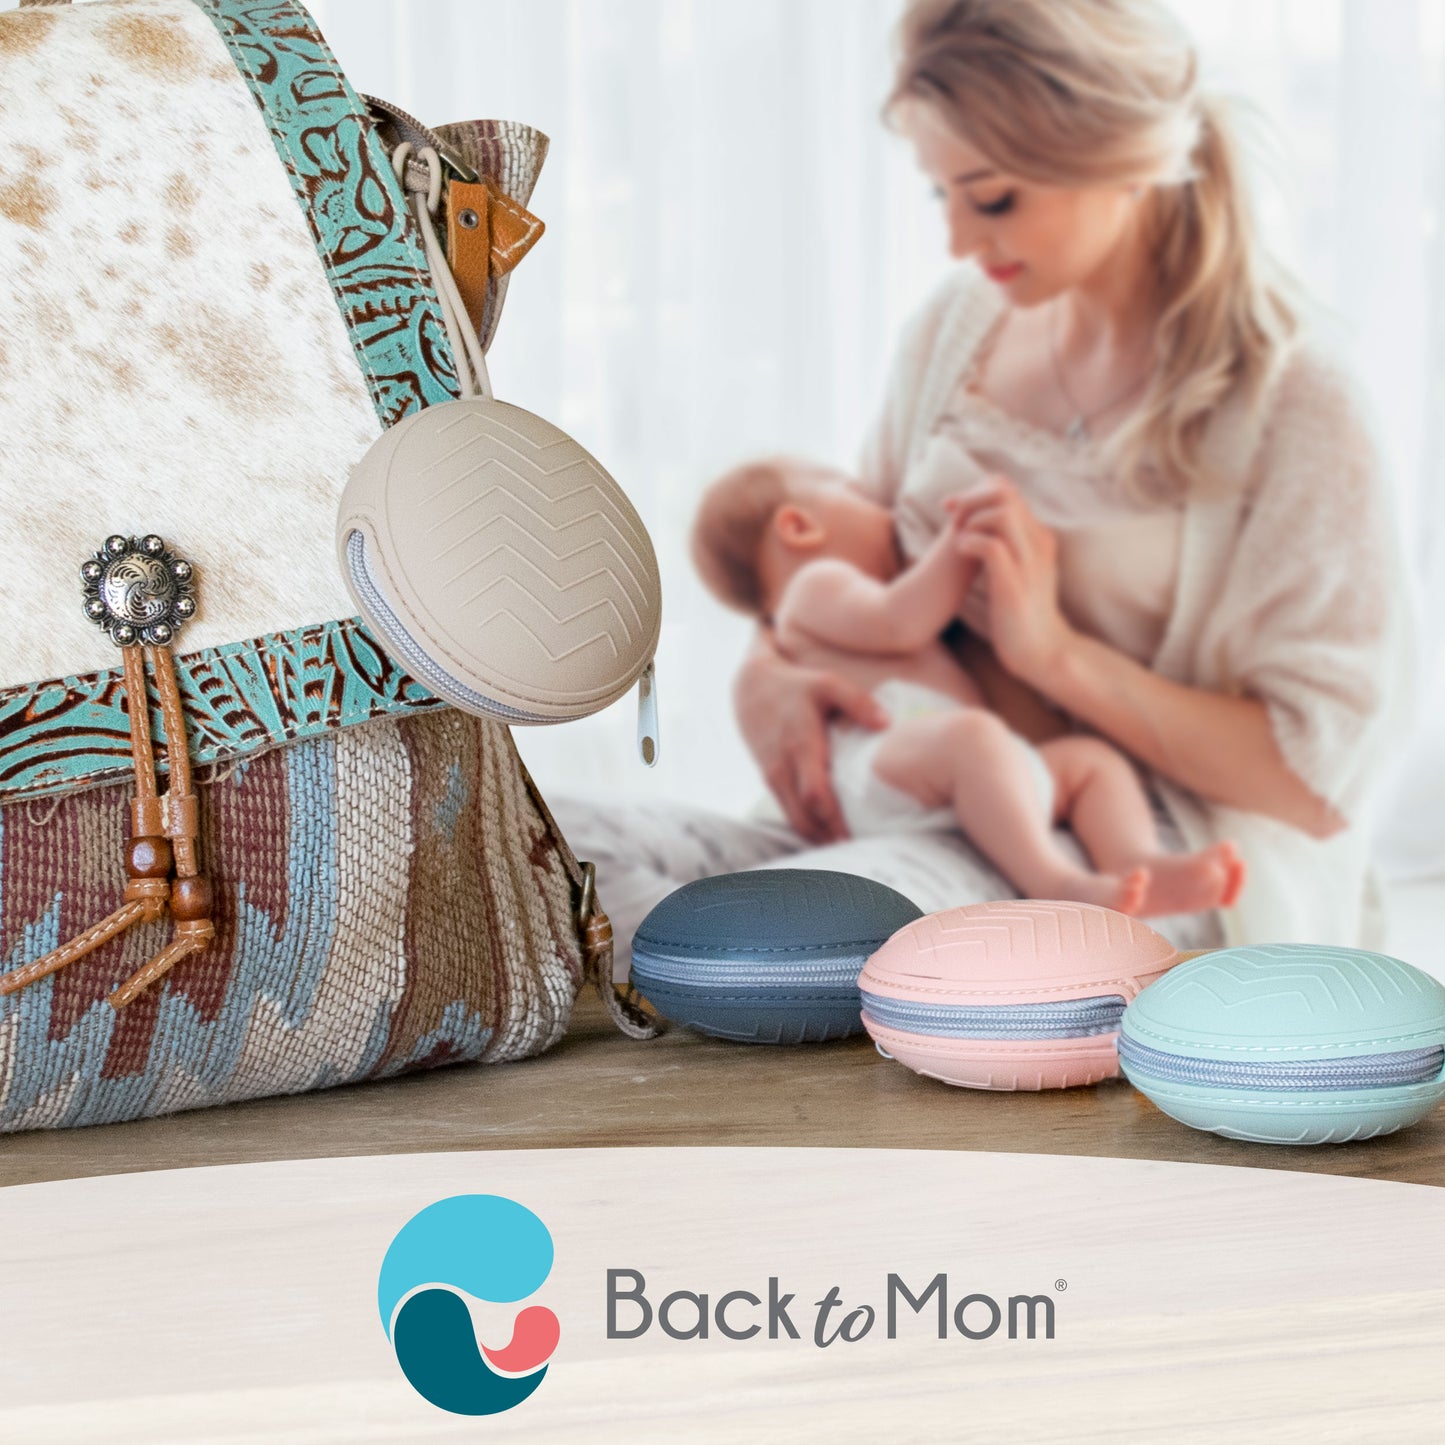 Best pacifier case and menstrual cup case on the market. Makes great gift. looks cute with any bag